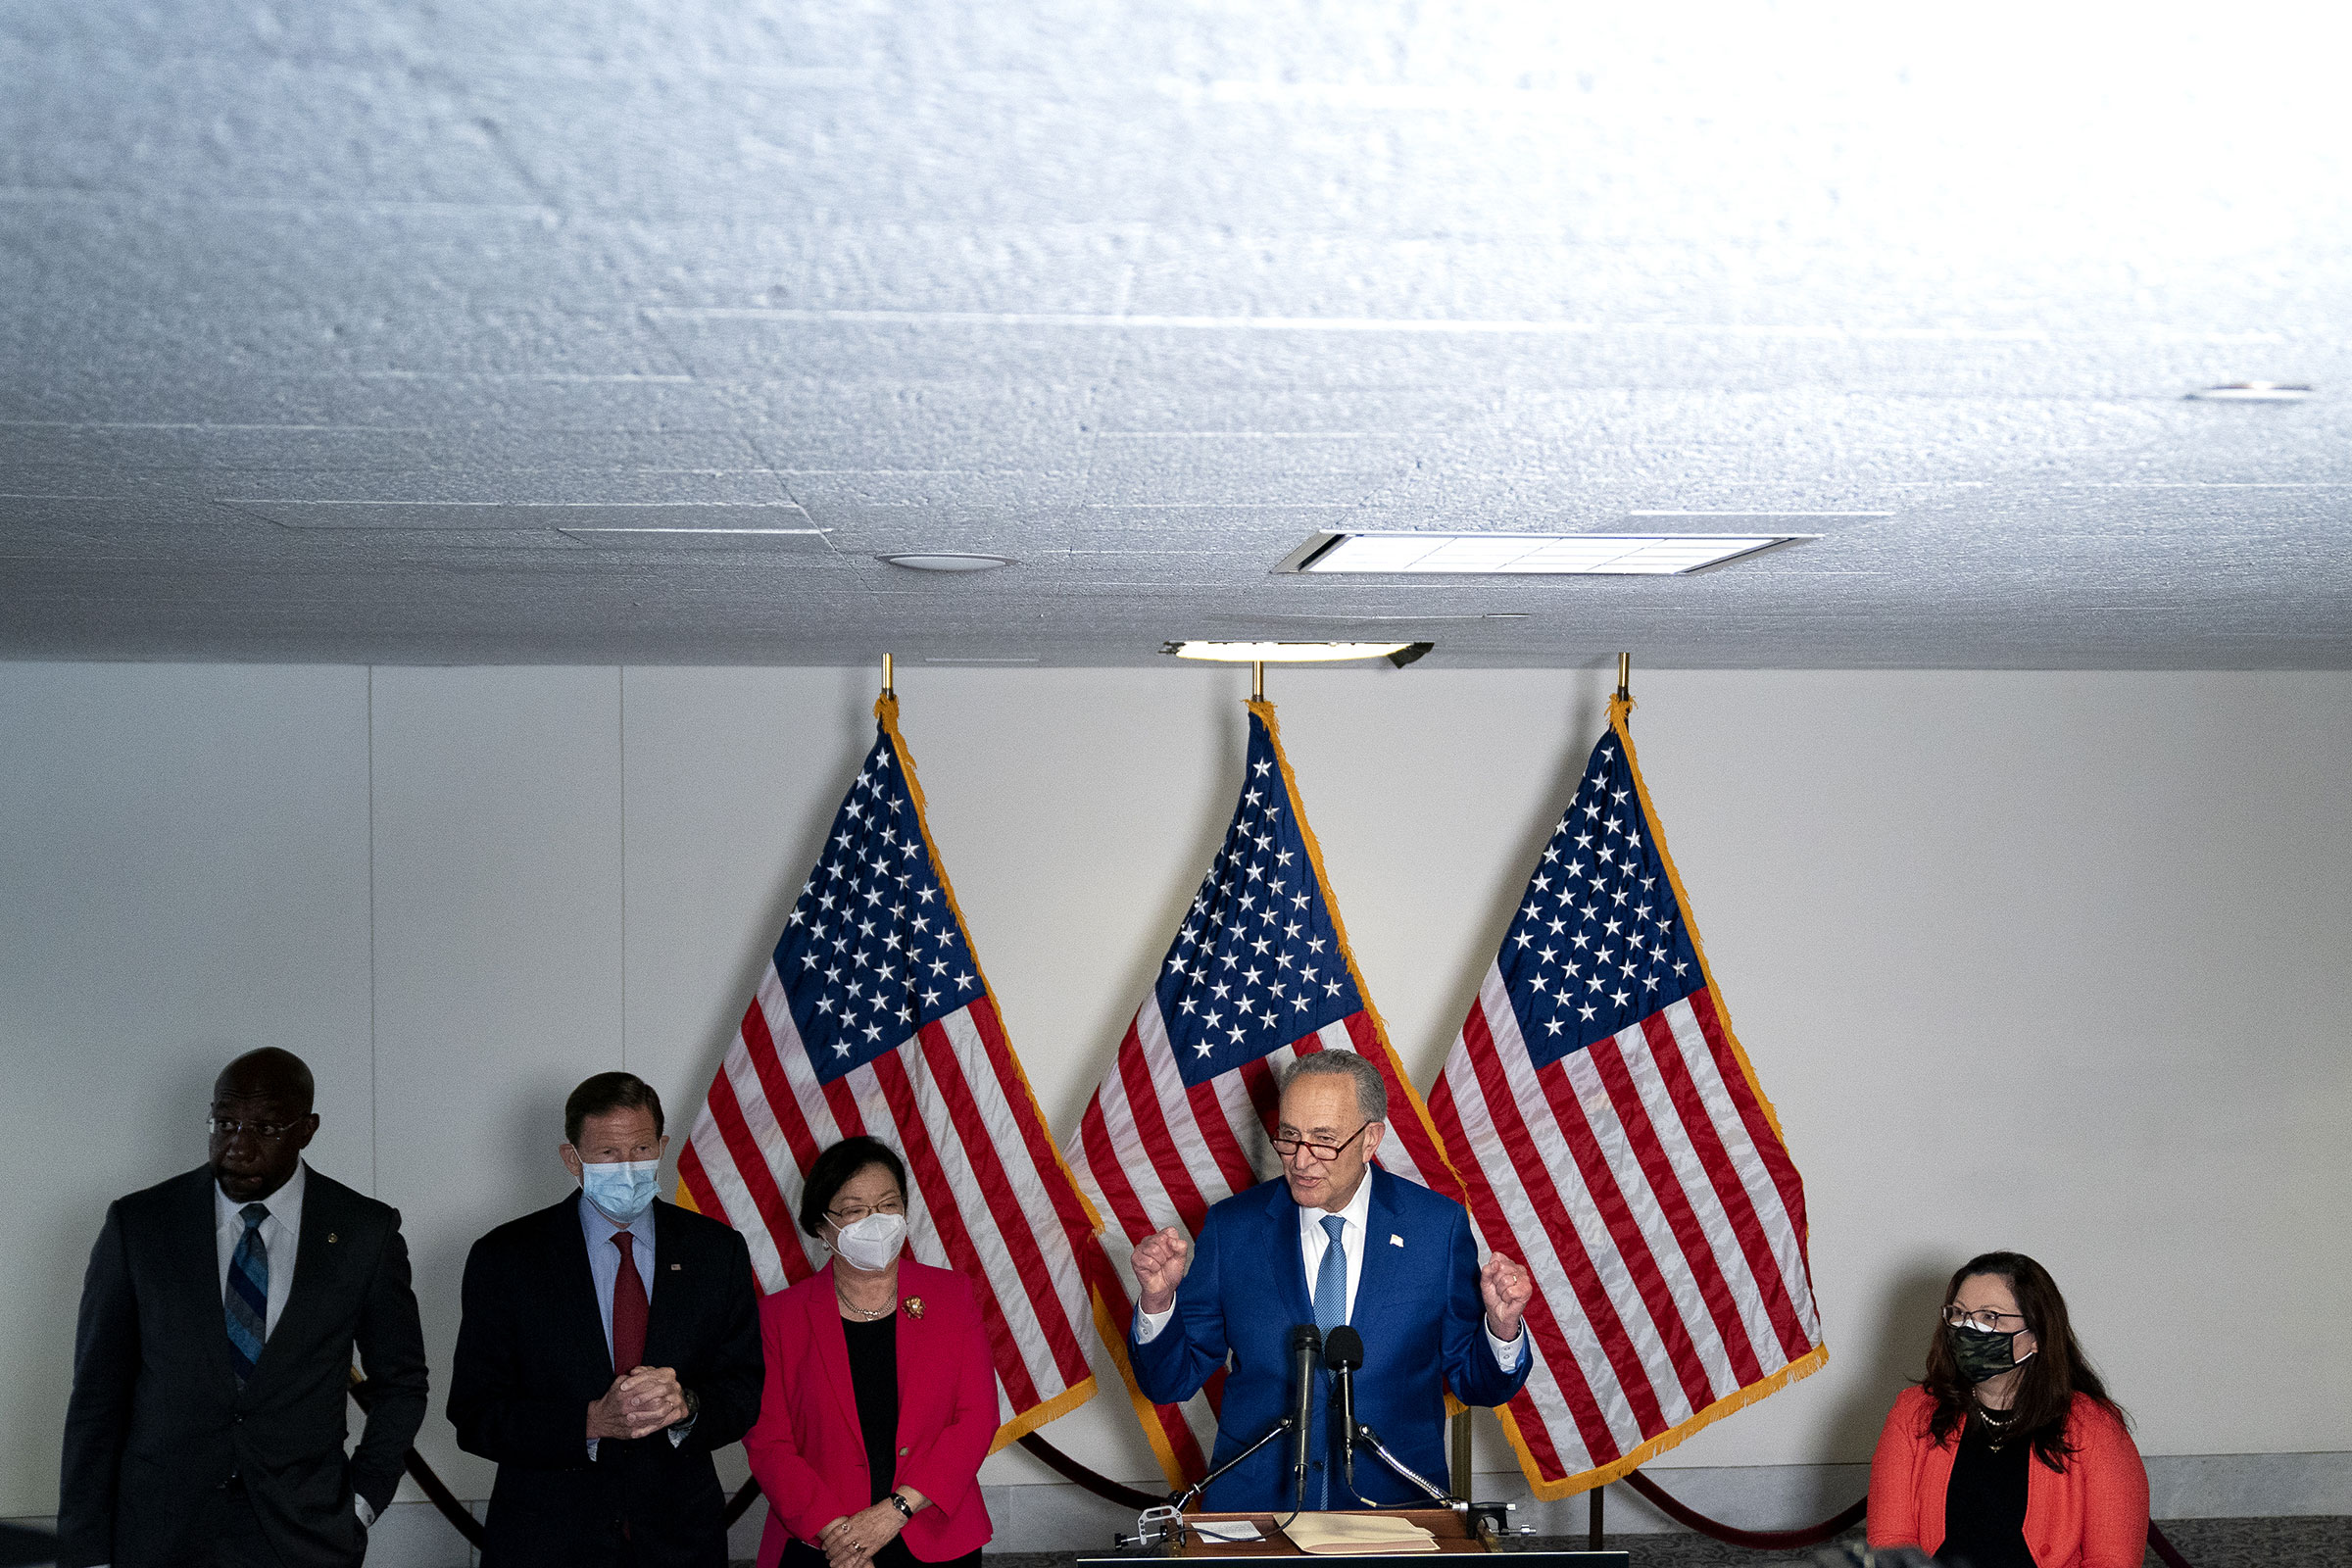 Senate Majority Leader Chuck Schumer, a Democrat from New York, center, speaks to members of the media following Senate Democratic policy luncheons in the Hart Senate Office Building in Washington, on April 20, 2021. (Stefani Reynolds—Bloomberg/Getty Images)